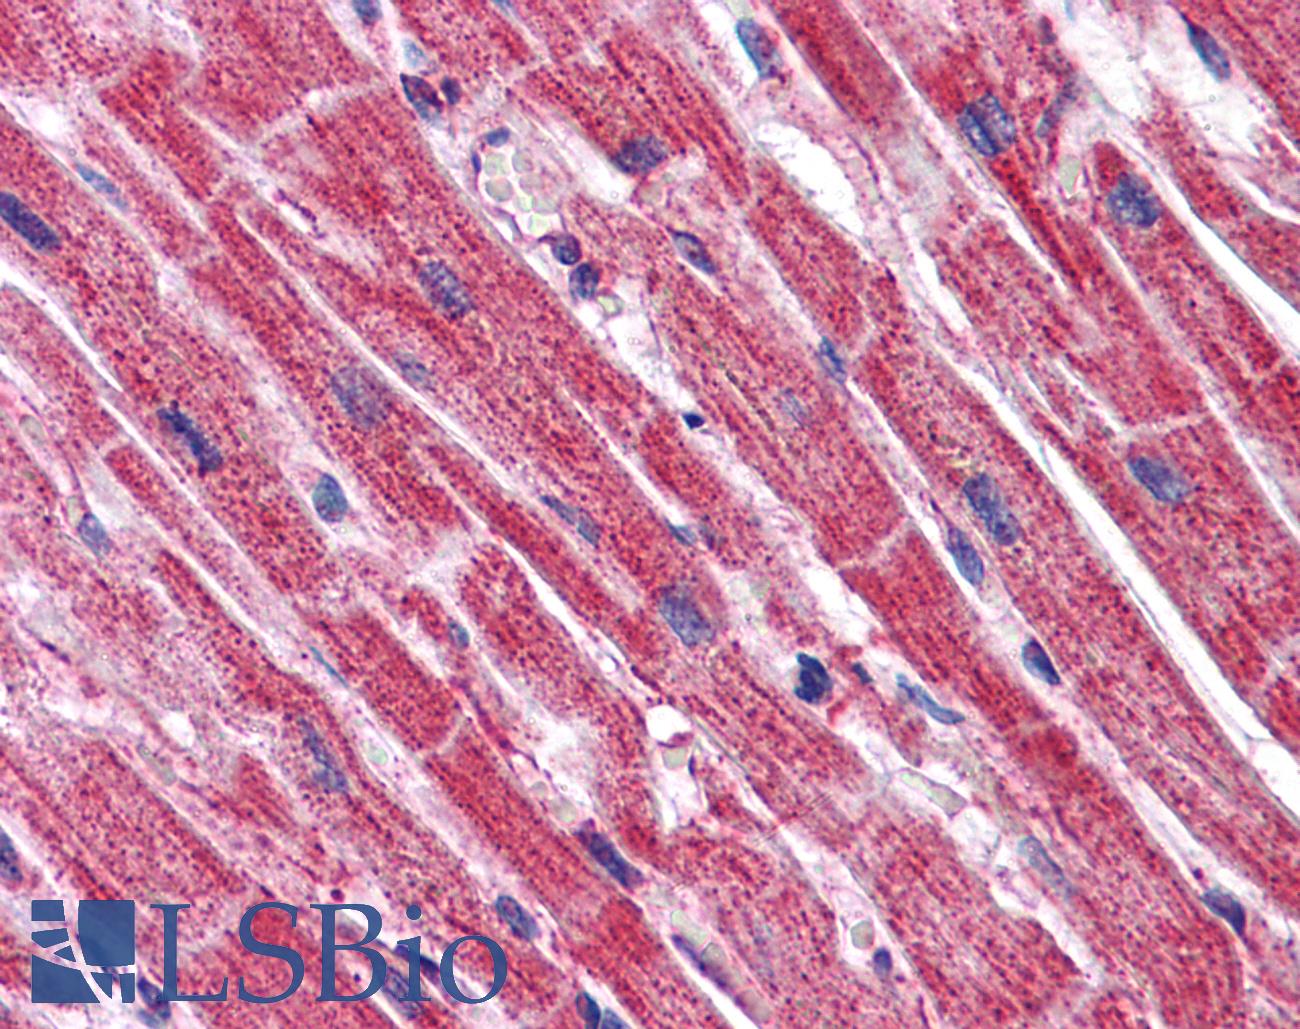 PAGR1 / C16orf53 Antibody - Anti-C16orf53 antibody IHC of human heart. Immunohistochemistry of formalin-fixed, paraffin-embedded tissue after heat-induced antigen retrieval. Antibody concentration 5 ug/ml.